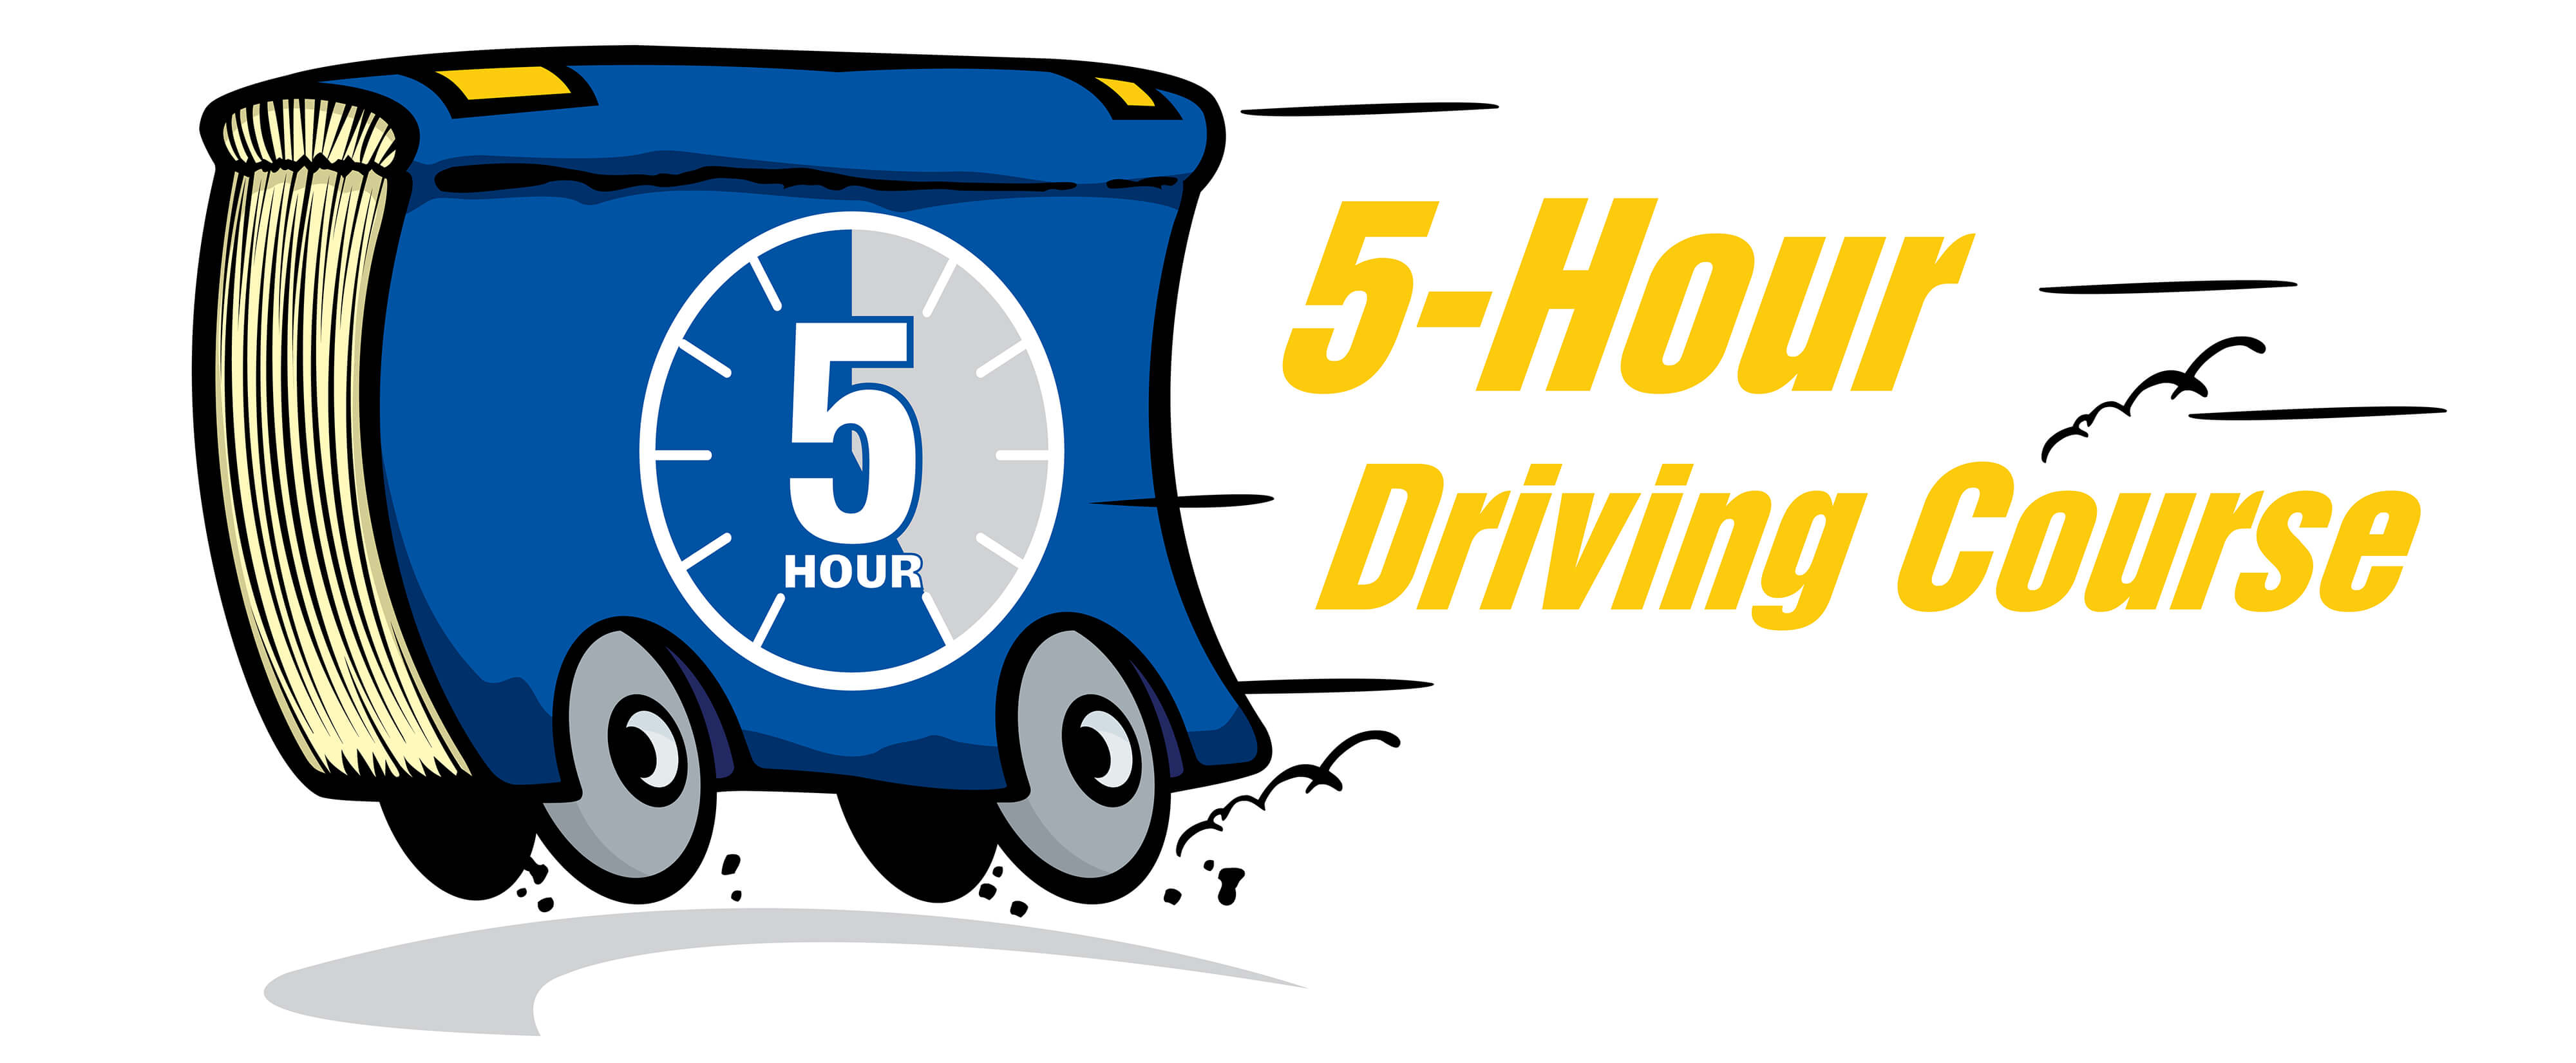 NYS 5 Hour Driving Course - Printable Version - Martin, Harding & Mazzotti 1800law1010